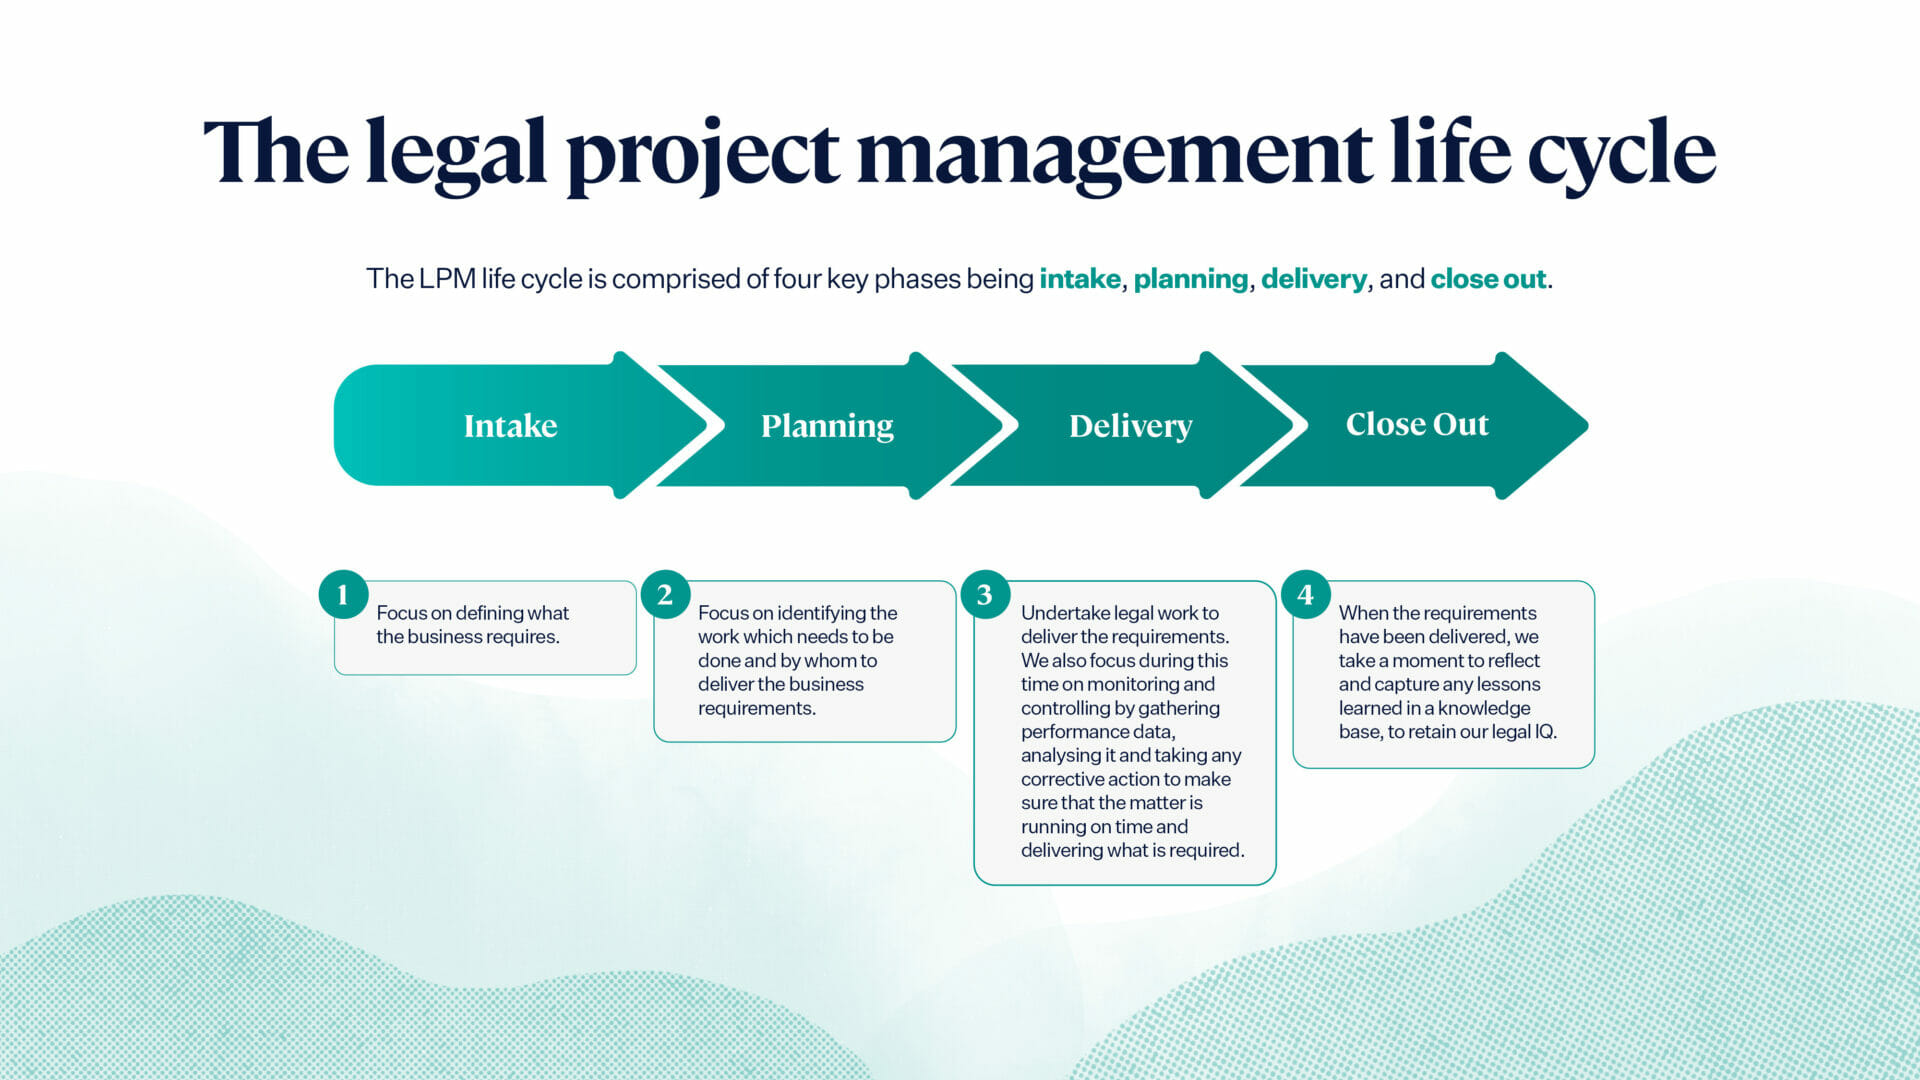 A slide from the Connected Legal Certification showing 'The legal project management life cycle'